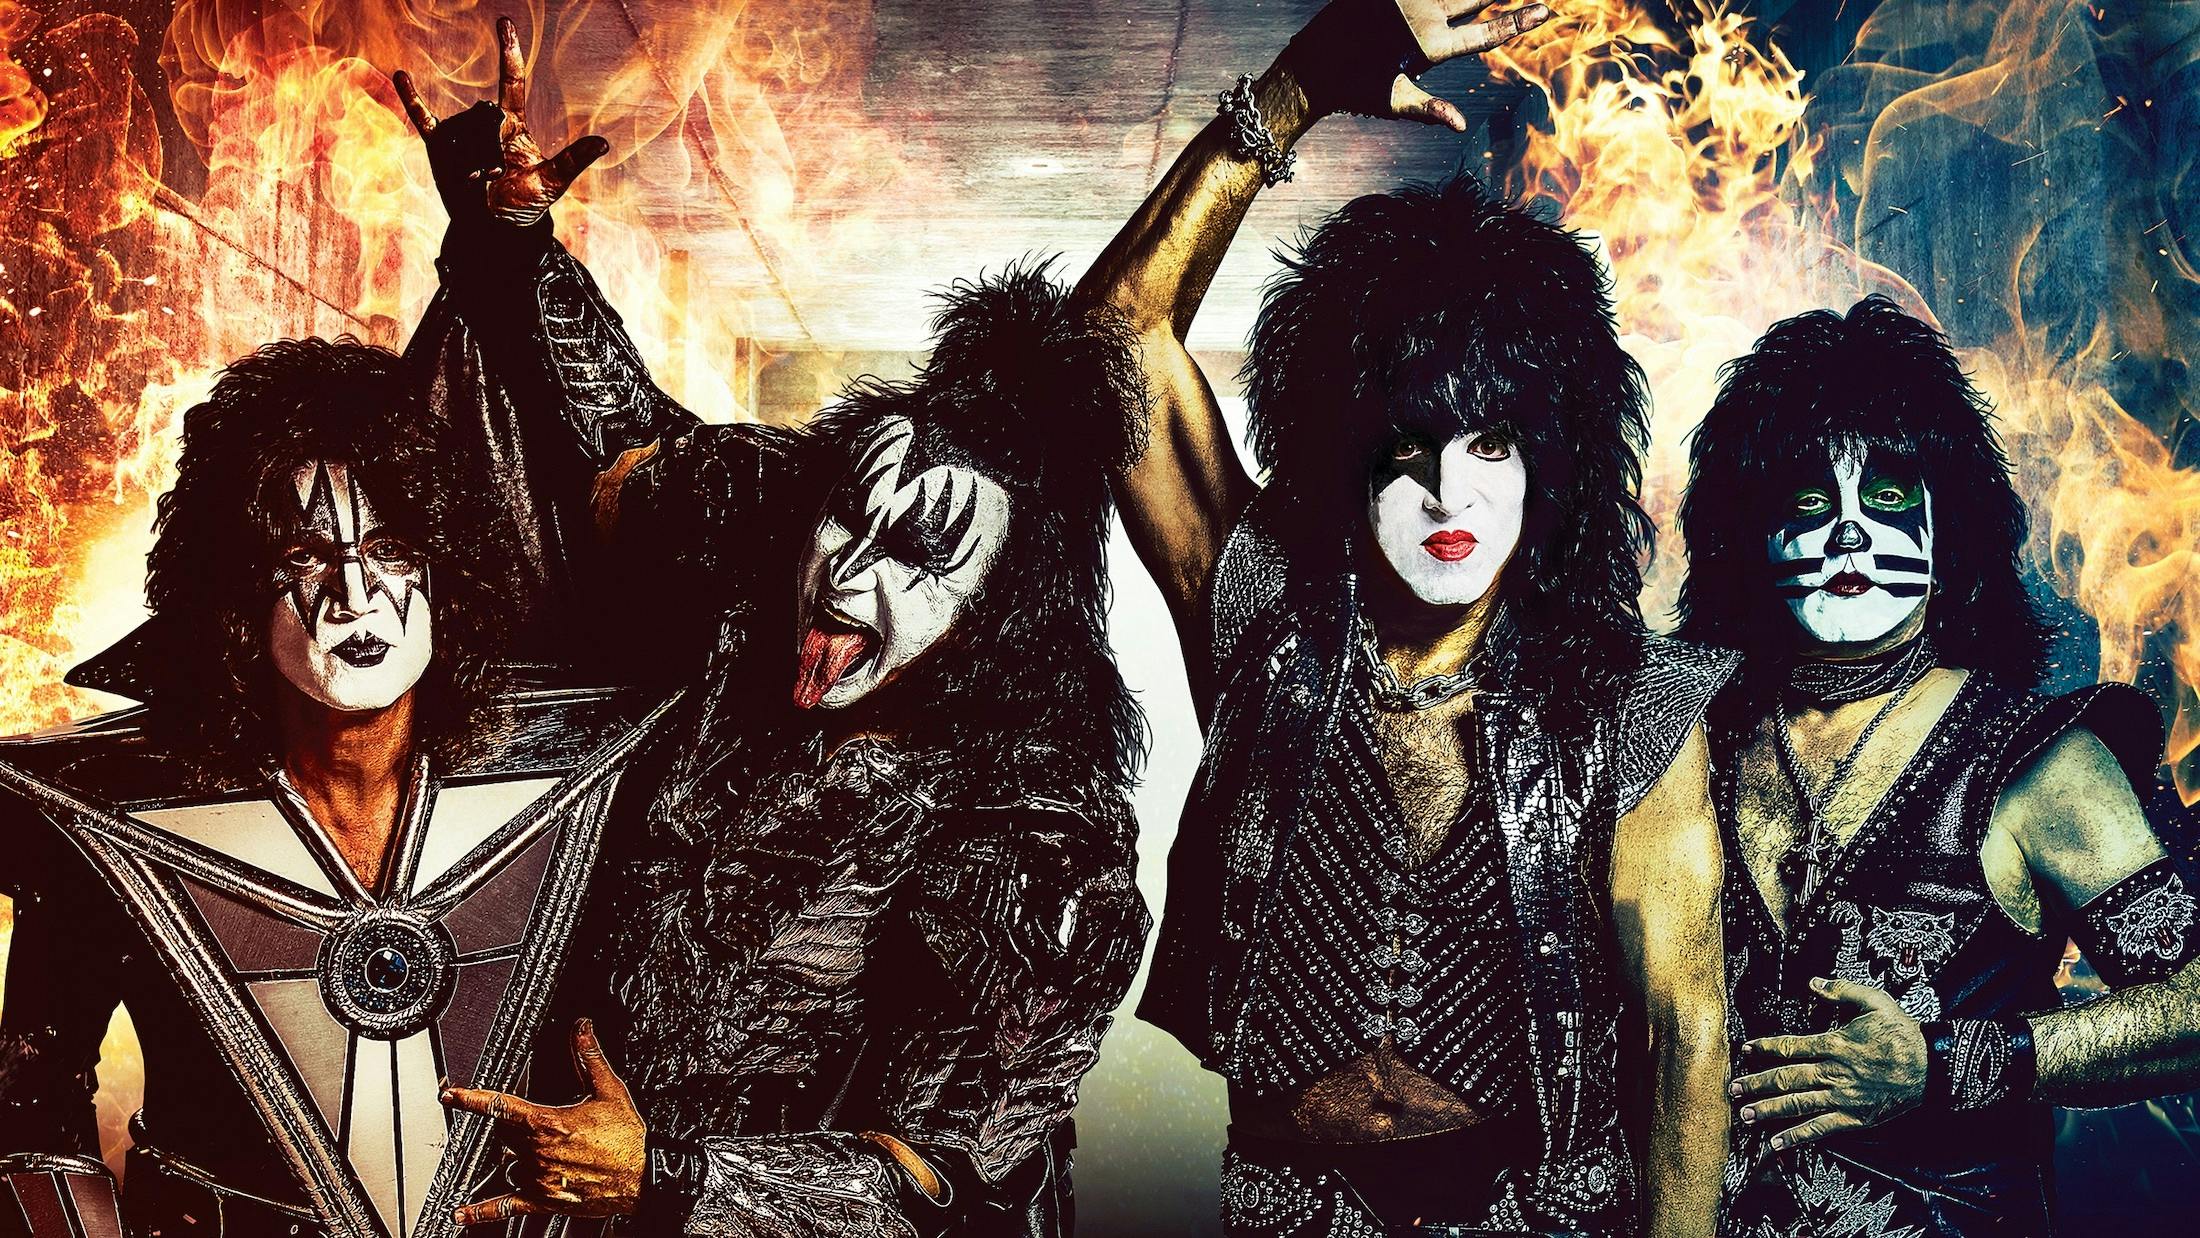 There's A New Pokémon That Looks Just Like KISS' Gene Simmons